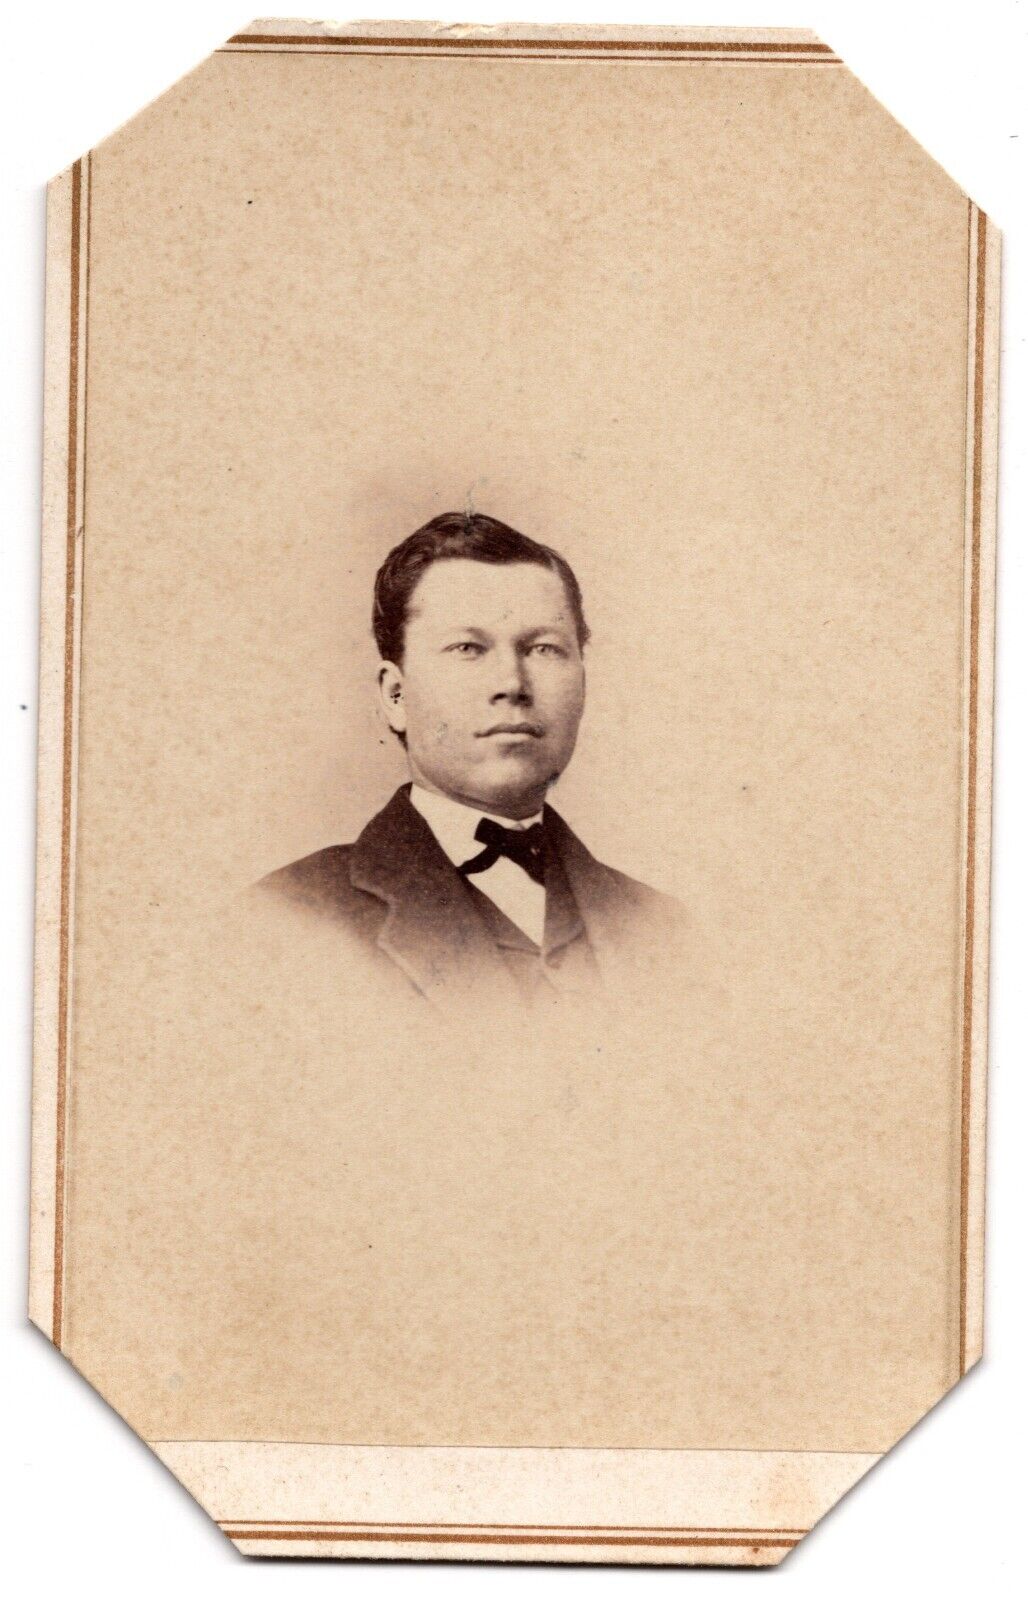 ANTIQUE CDV CIRCA 1860s BUCHHOLZ HANDSOME YOUNG MAN IN SUIT SPRINGFIELD MA.